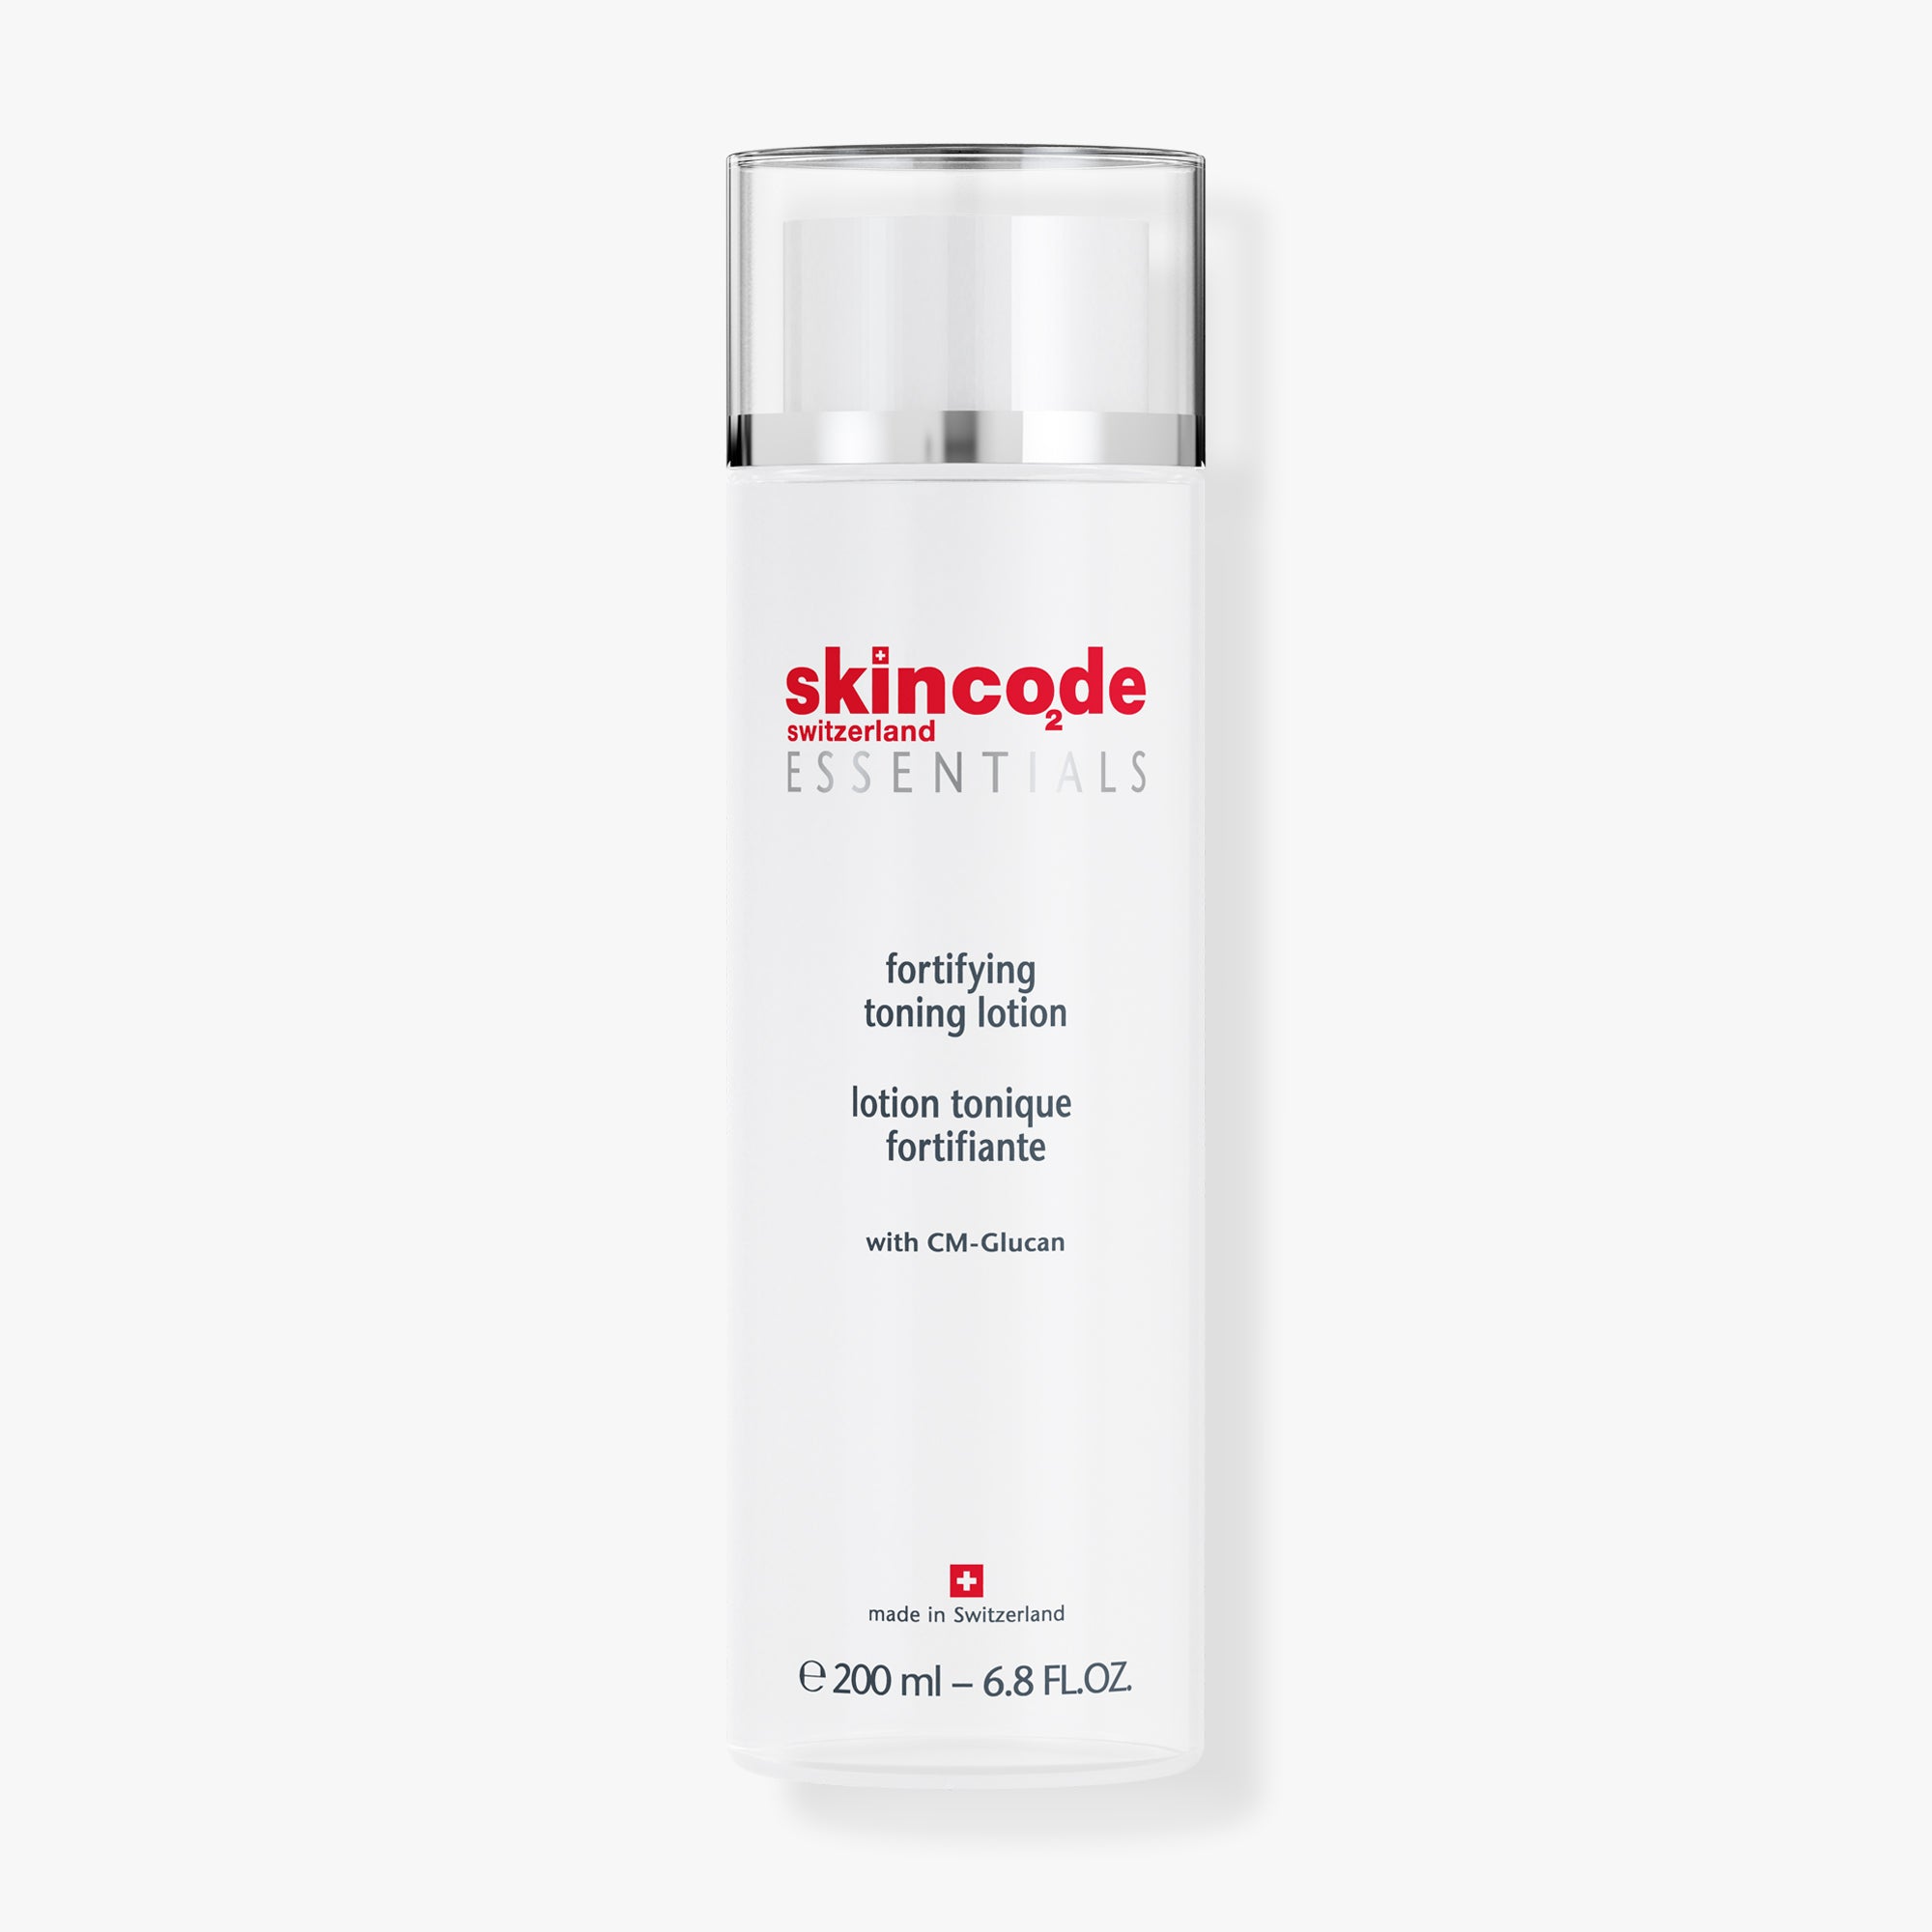 SkinCode Essentials, Fortifying Toning Lotion